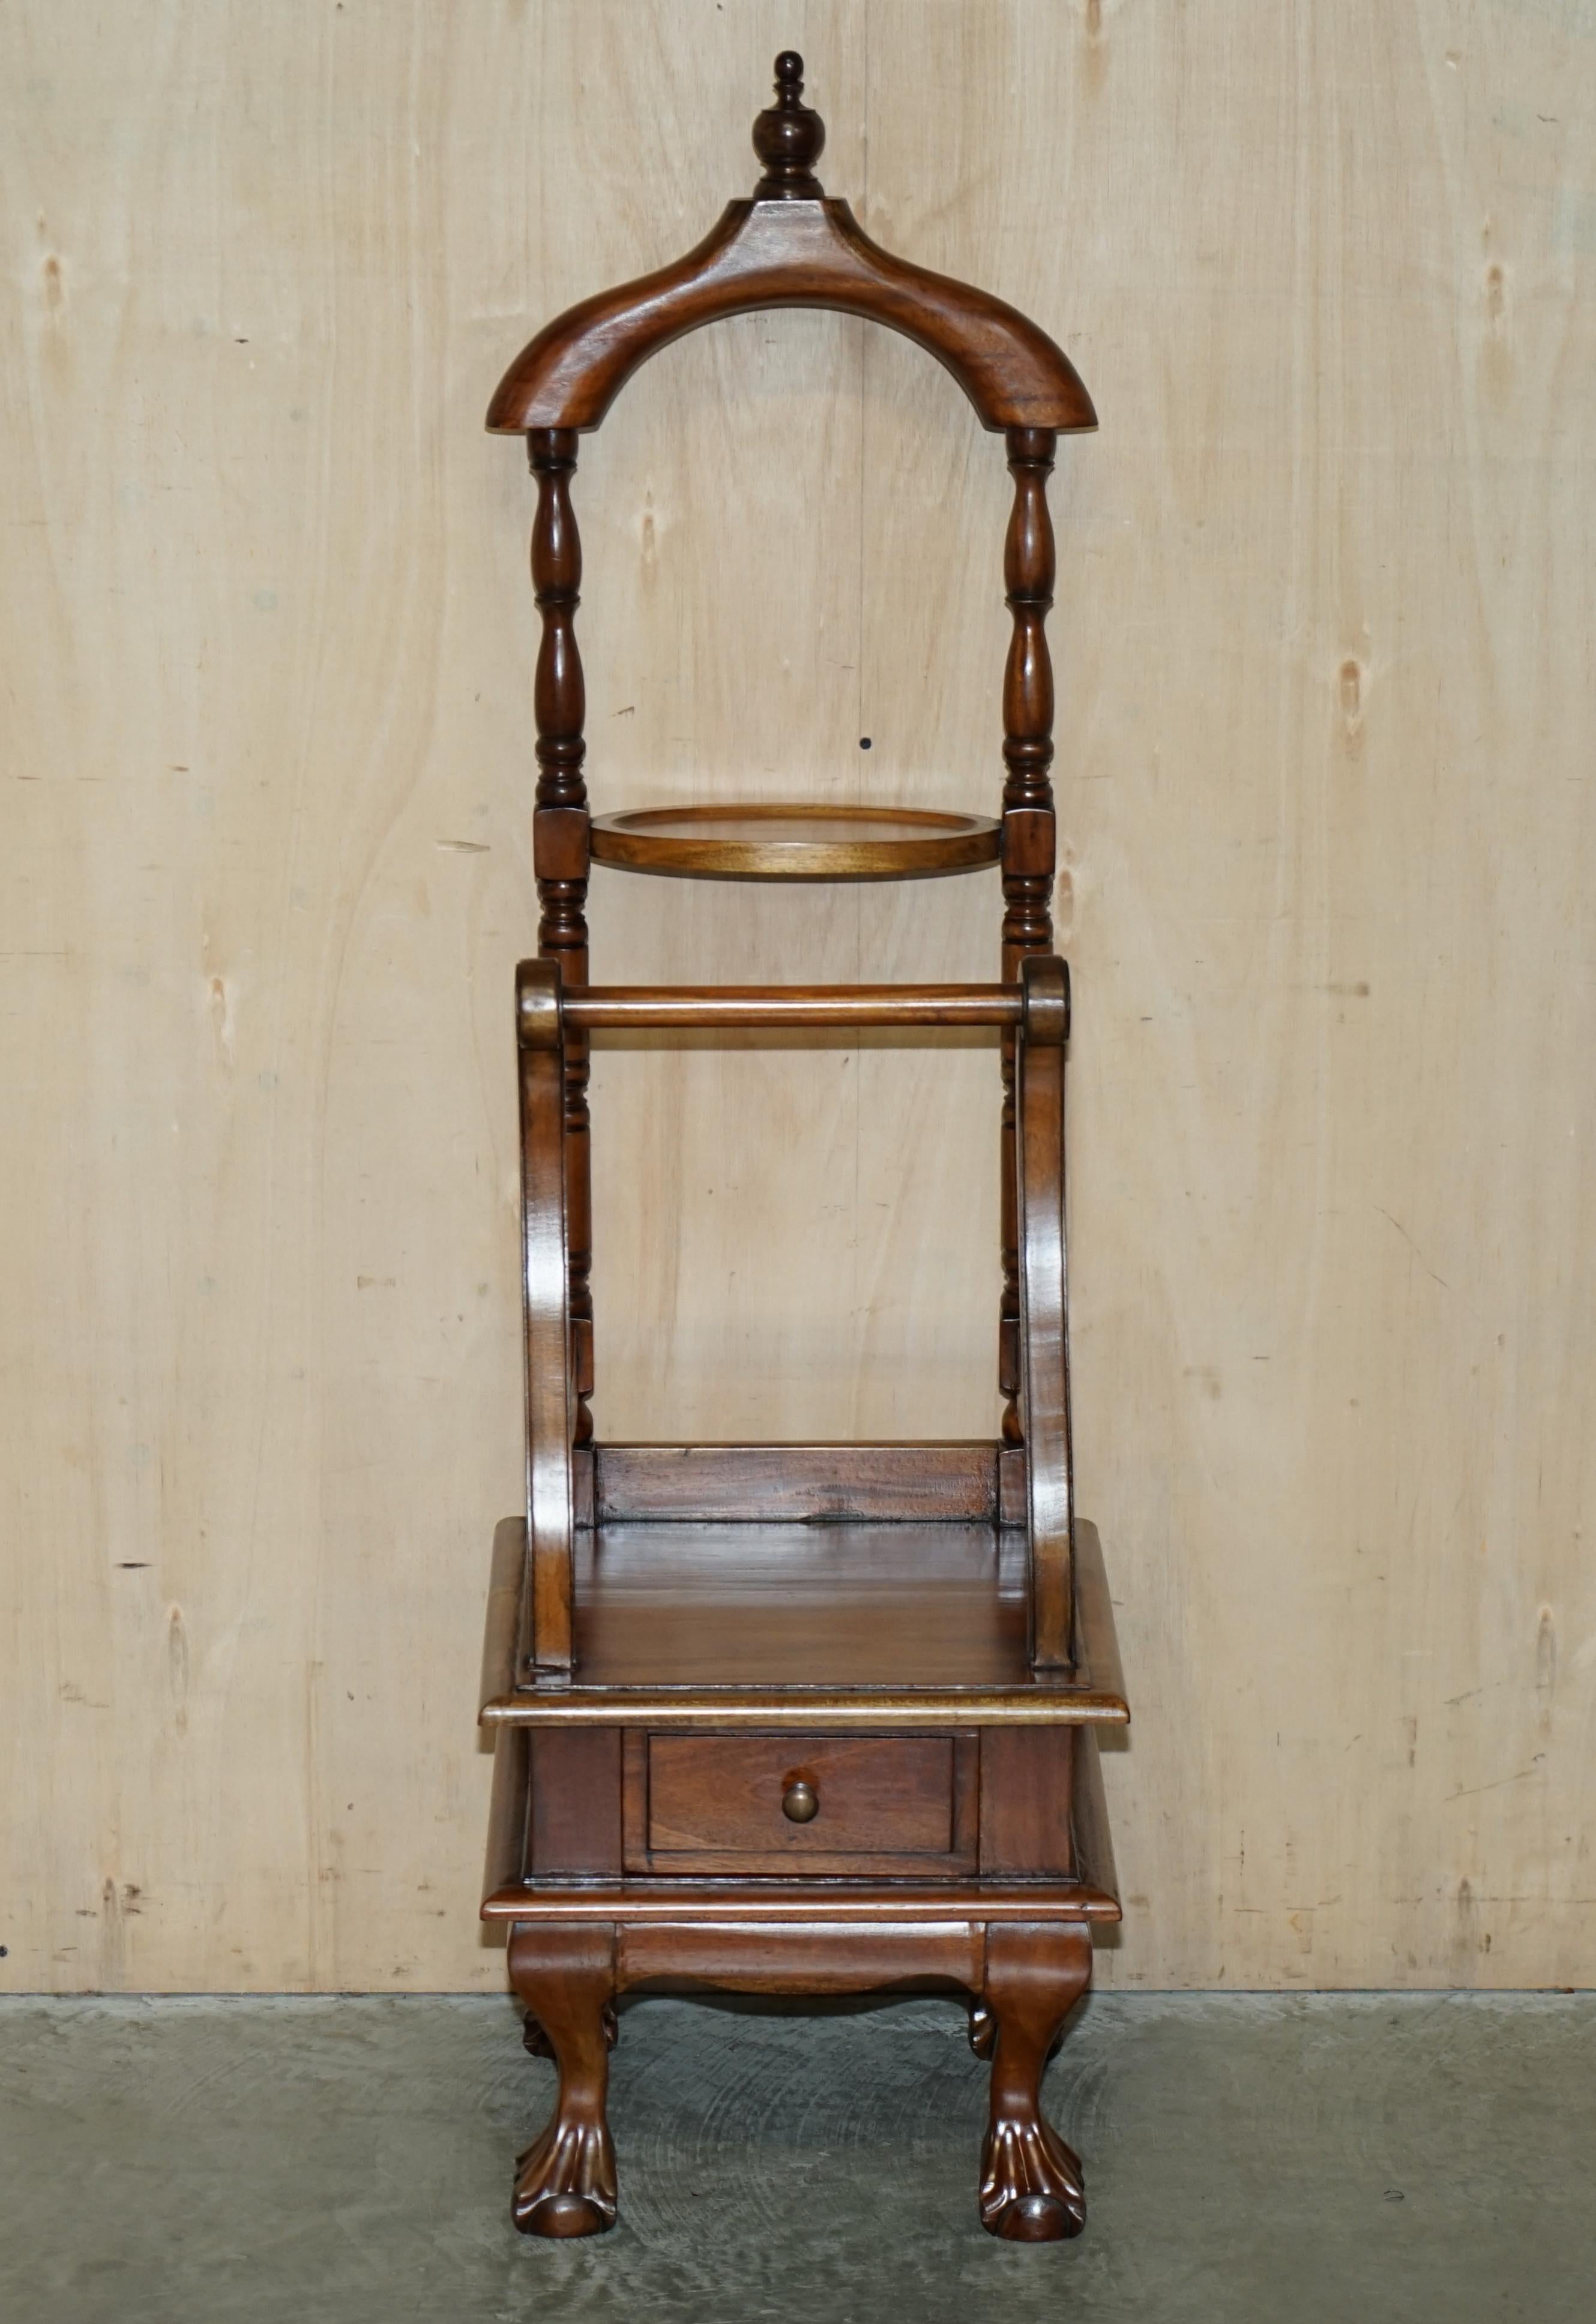 We are delighted to offer for sale this lovely hand made and hand carved Gentlemen’s Valet stand with single drawer and Claw & Ball feet

Please note the delivery fee listed is just a guide, it covers within the M25 only for the UK and local